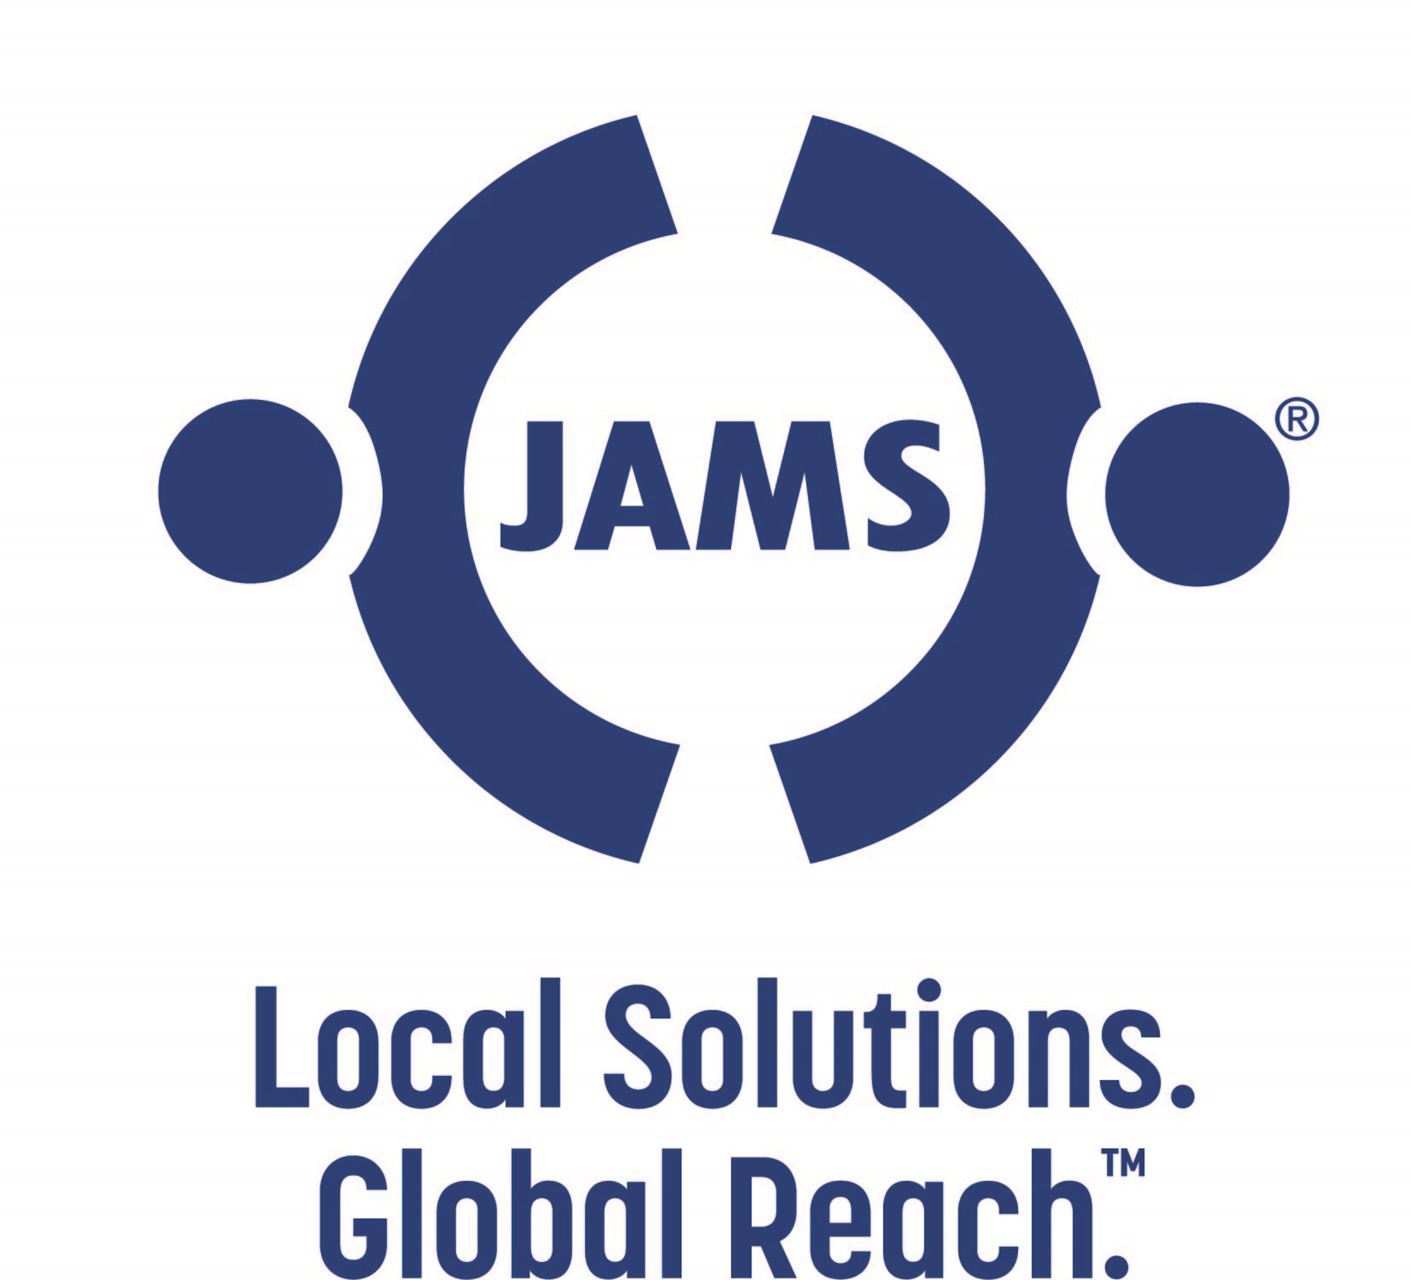 JAMS Local Solutions. Global Reach.